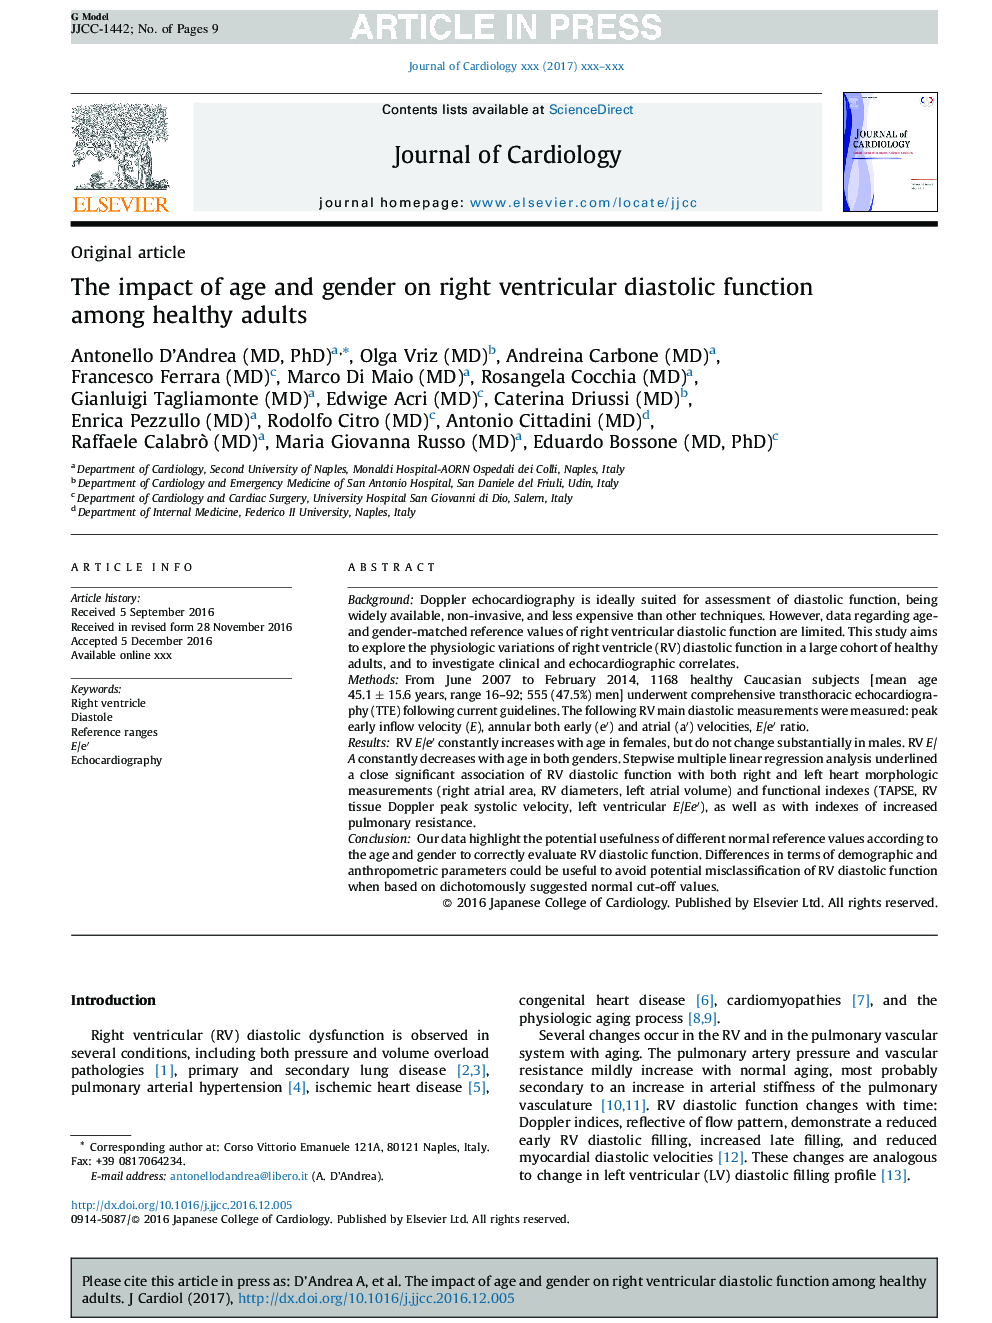 The impact of age and gender on right ventricular diastolic function among healthy adults